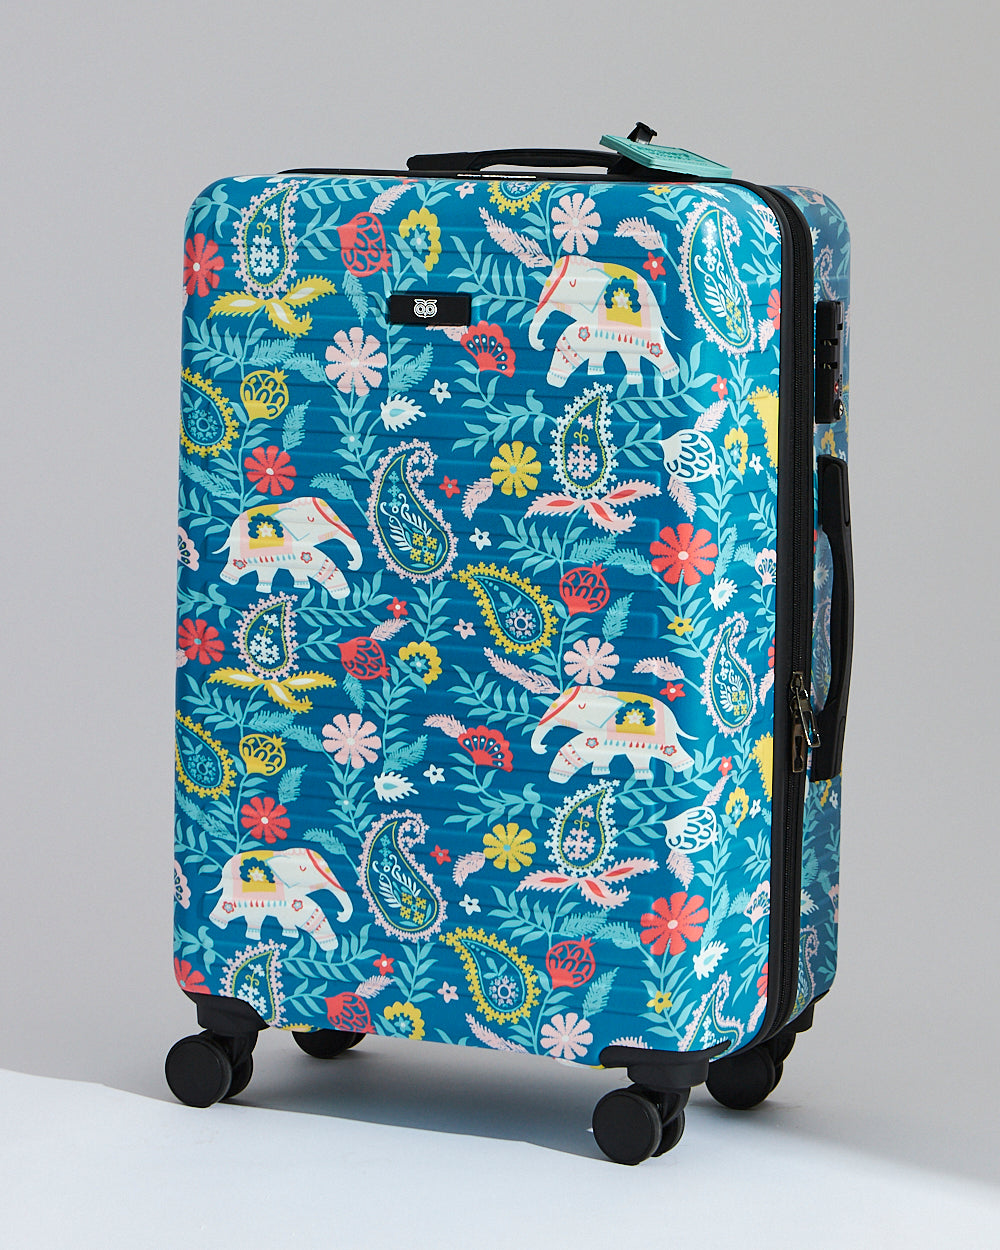 Paisley Tusker Luggage, 24"| Chumbak for Assembly